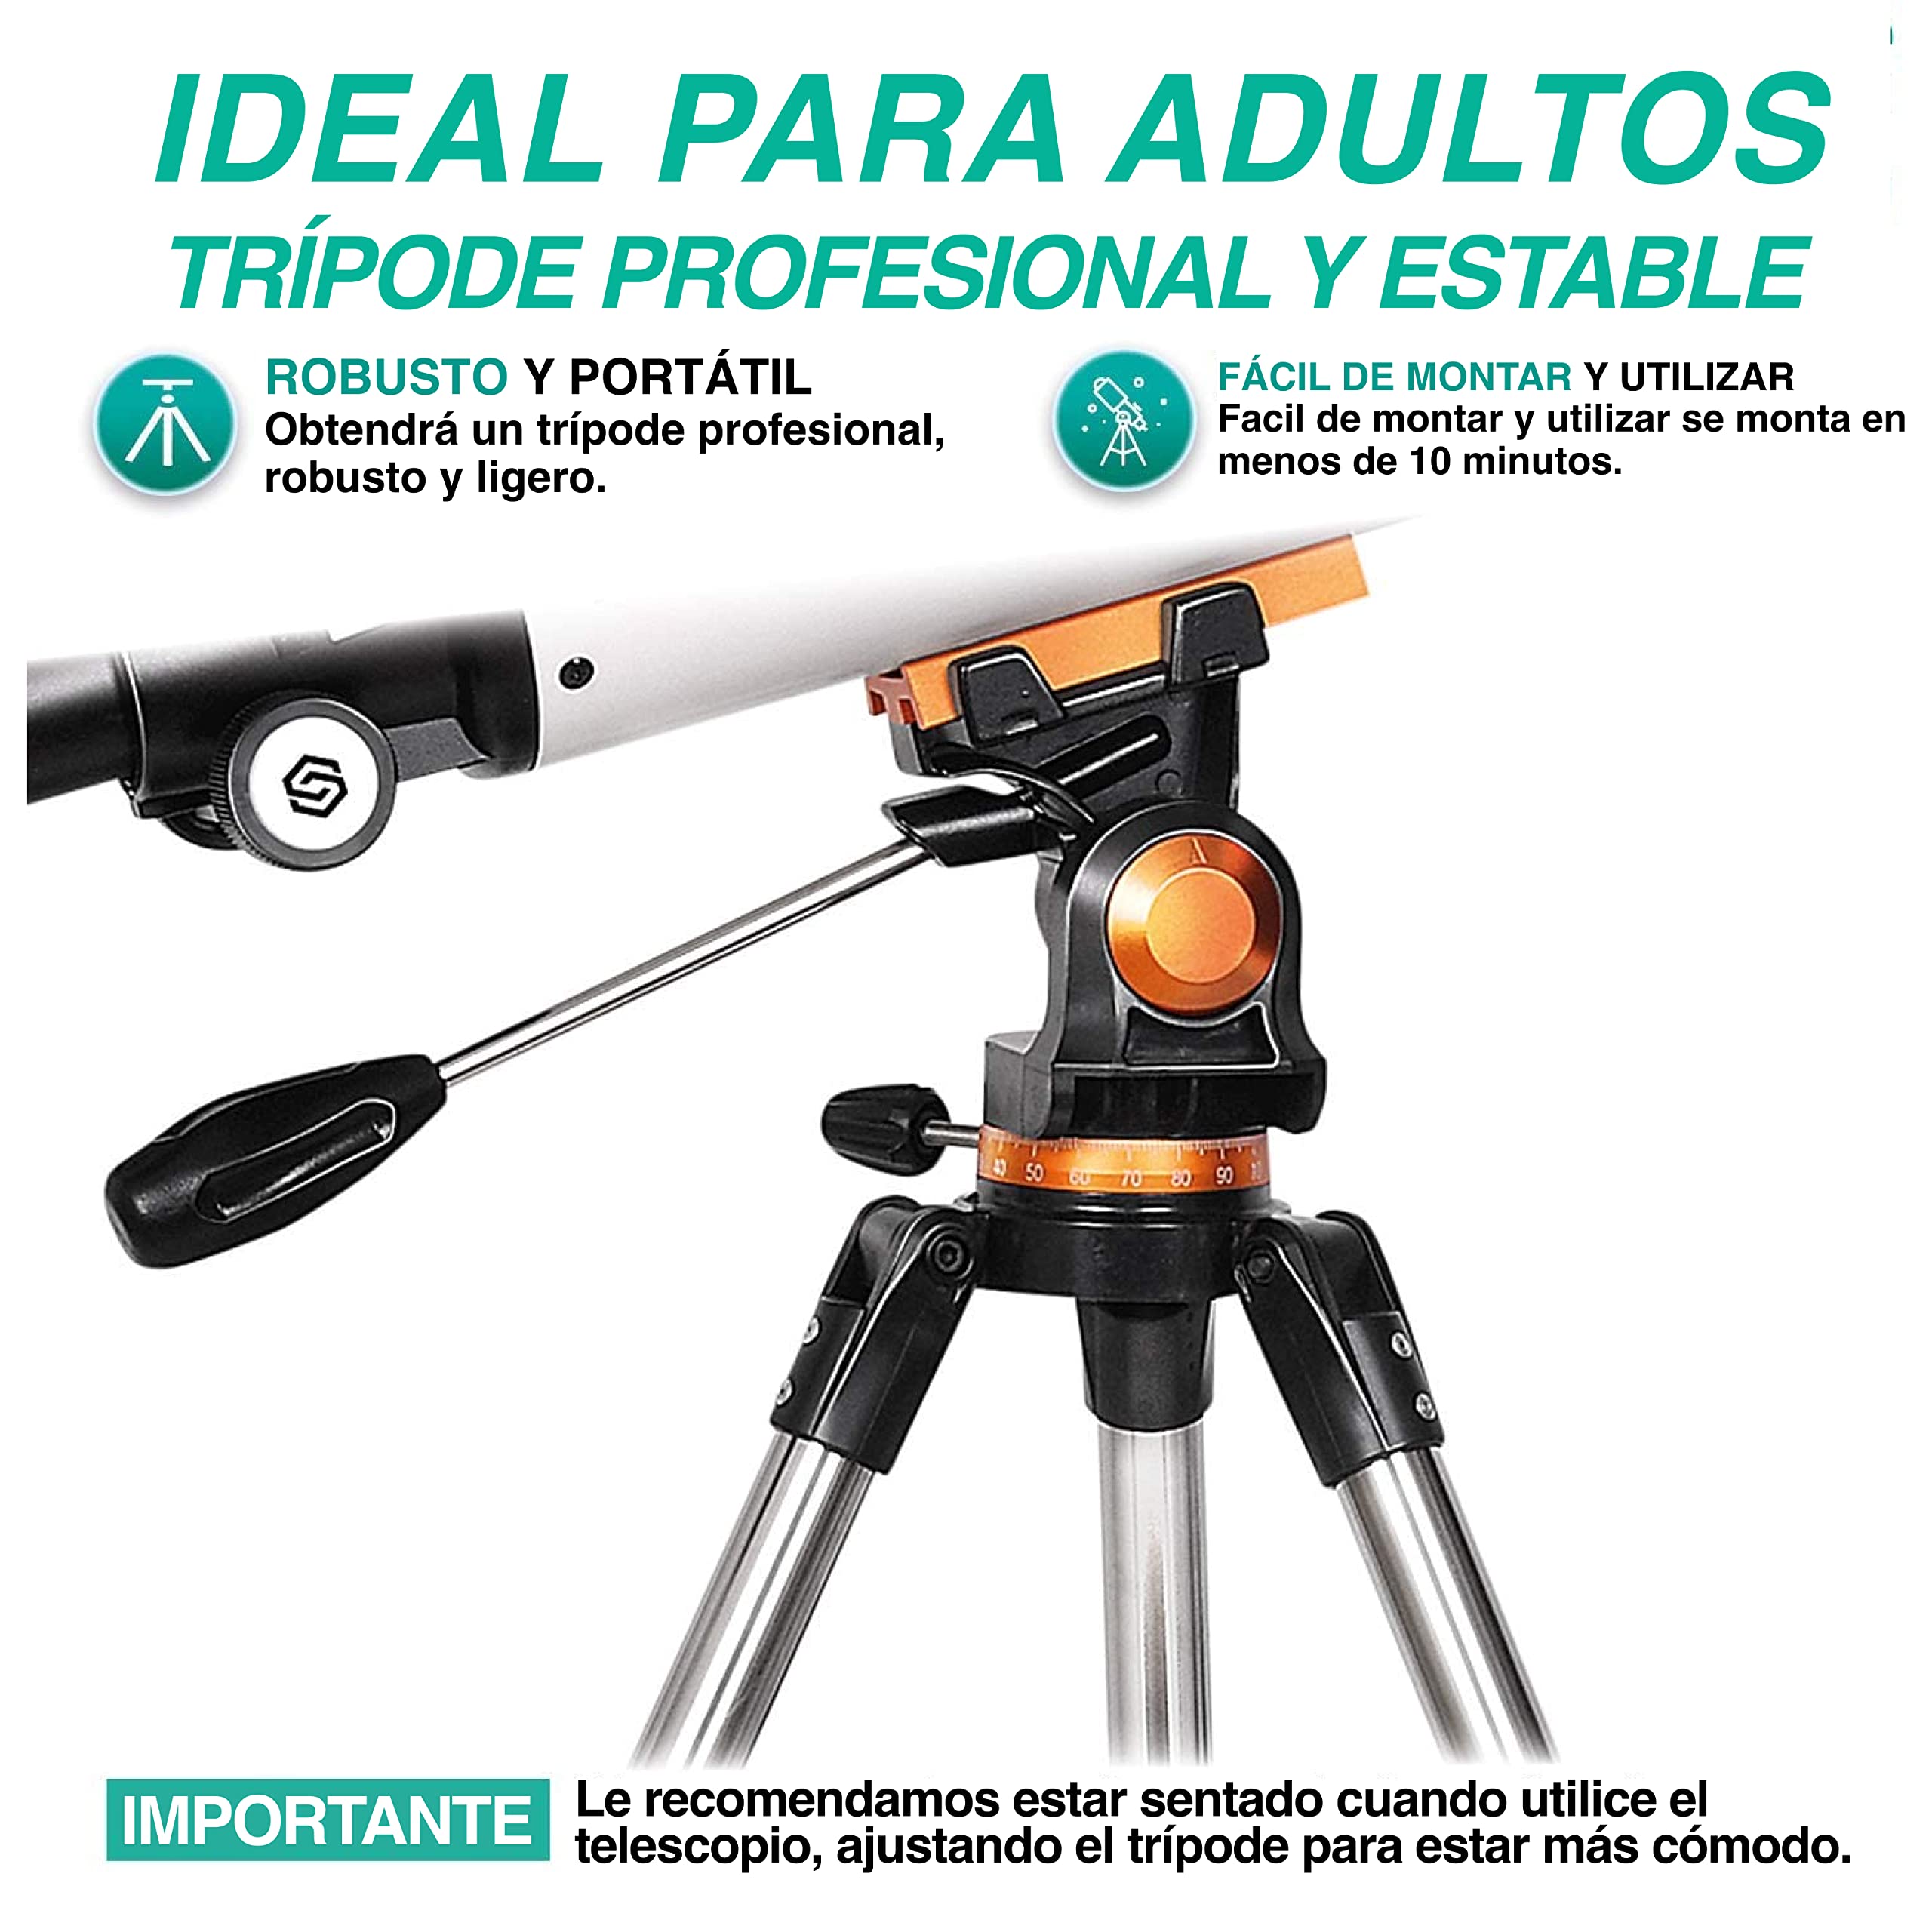 Telescope for Astronomy for Adult Beginners - Profesional, Portable and Powerful 20x-250x - Easy to Mount and Use - Astronomical Telescope for Moon, Planets and Stargazing - Includes a 2-Year Warranty